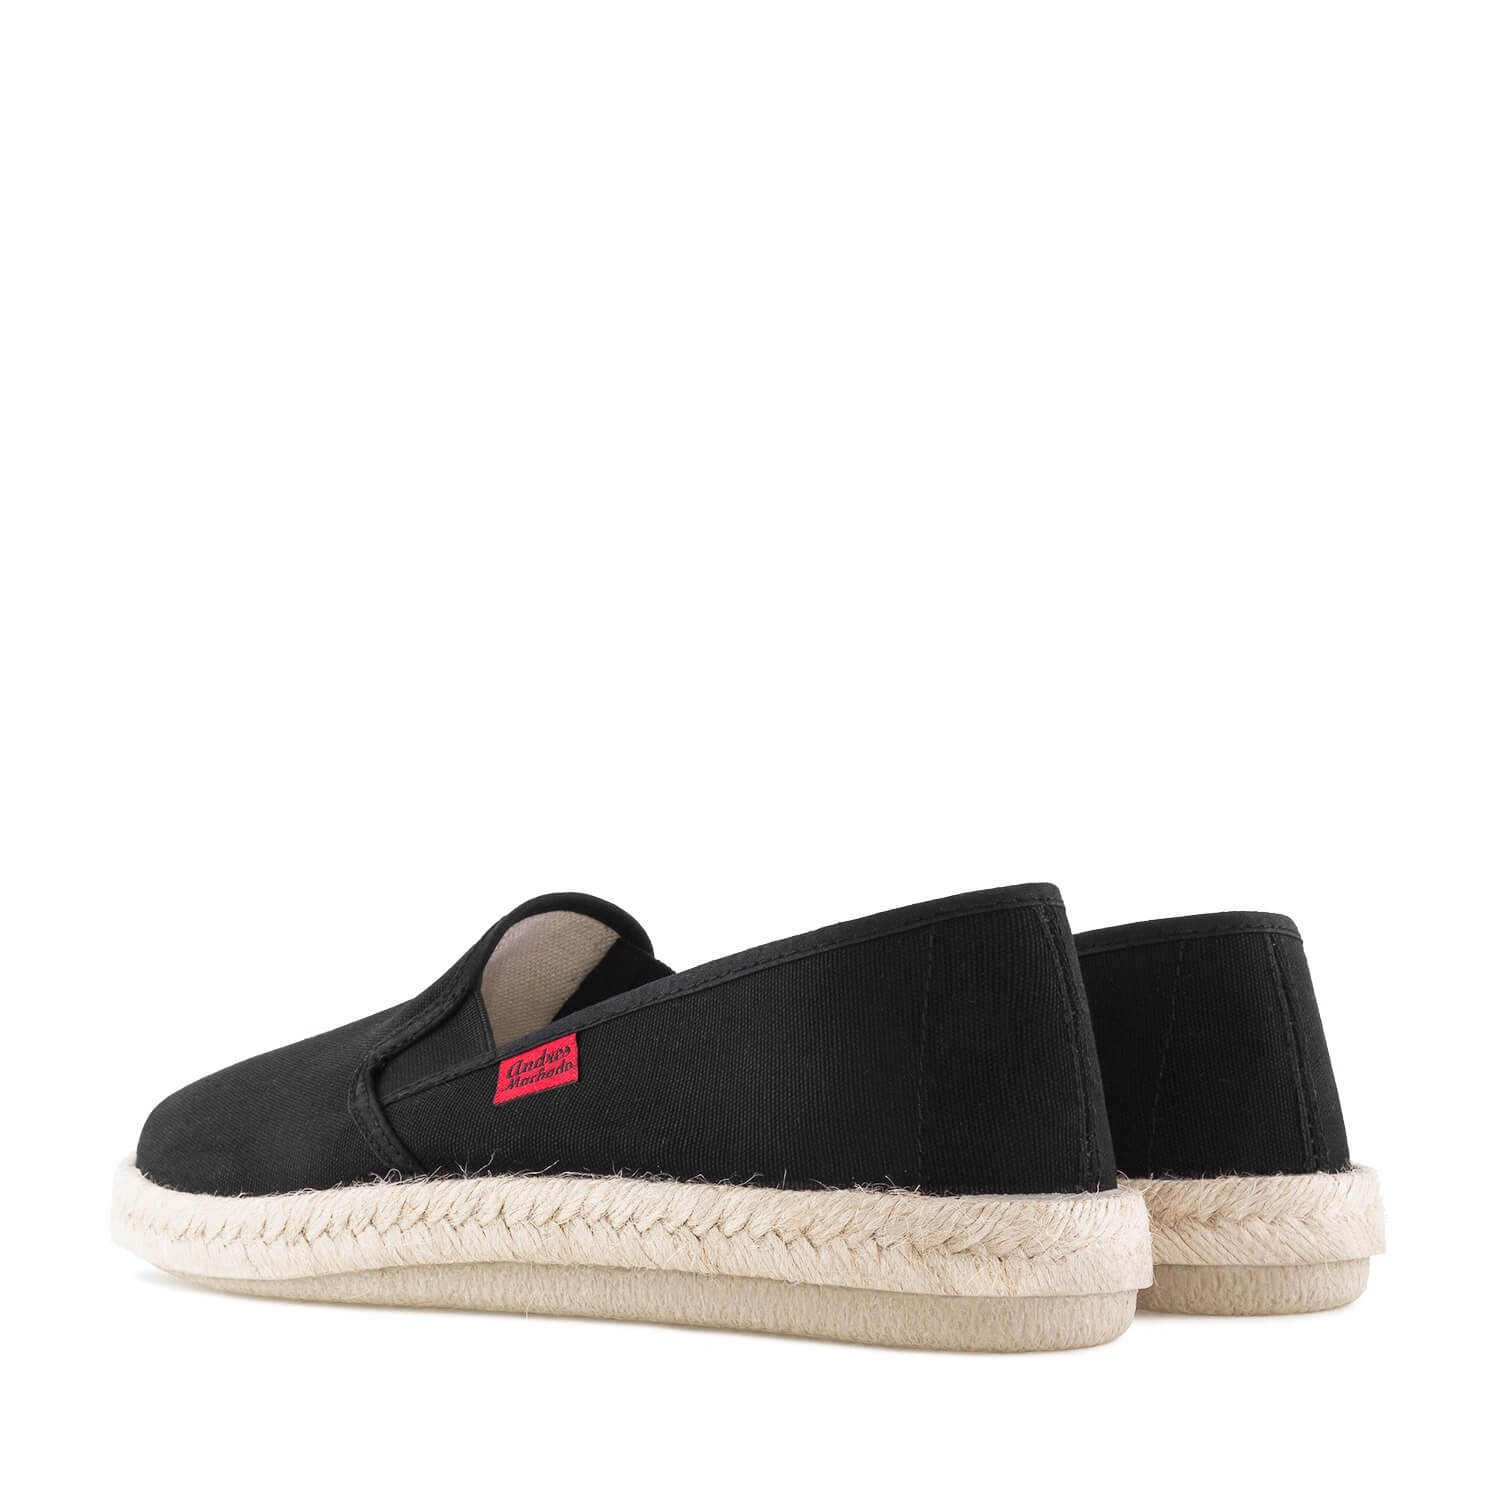 Mythical Black Canvas Slip-On Shoes with Rubber and Jute Sole 